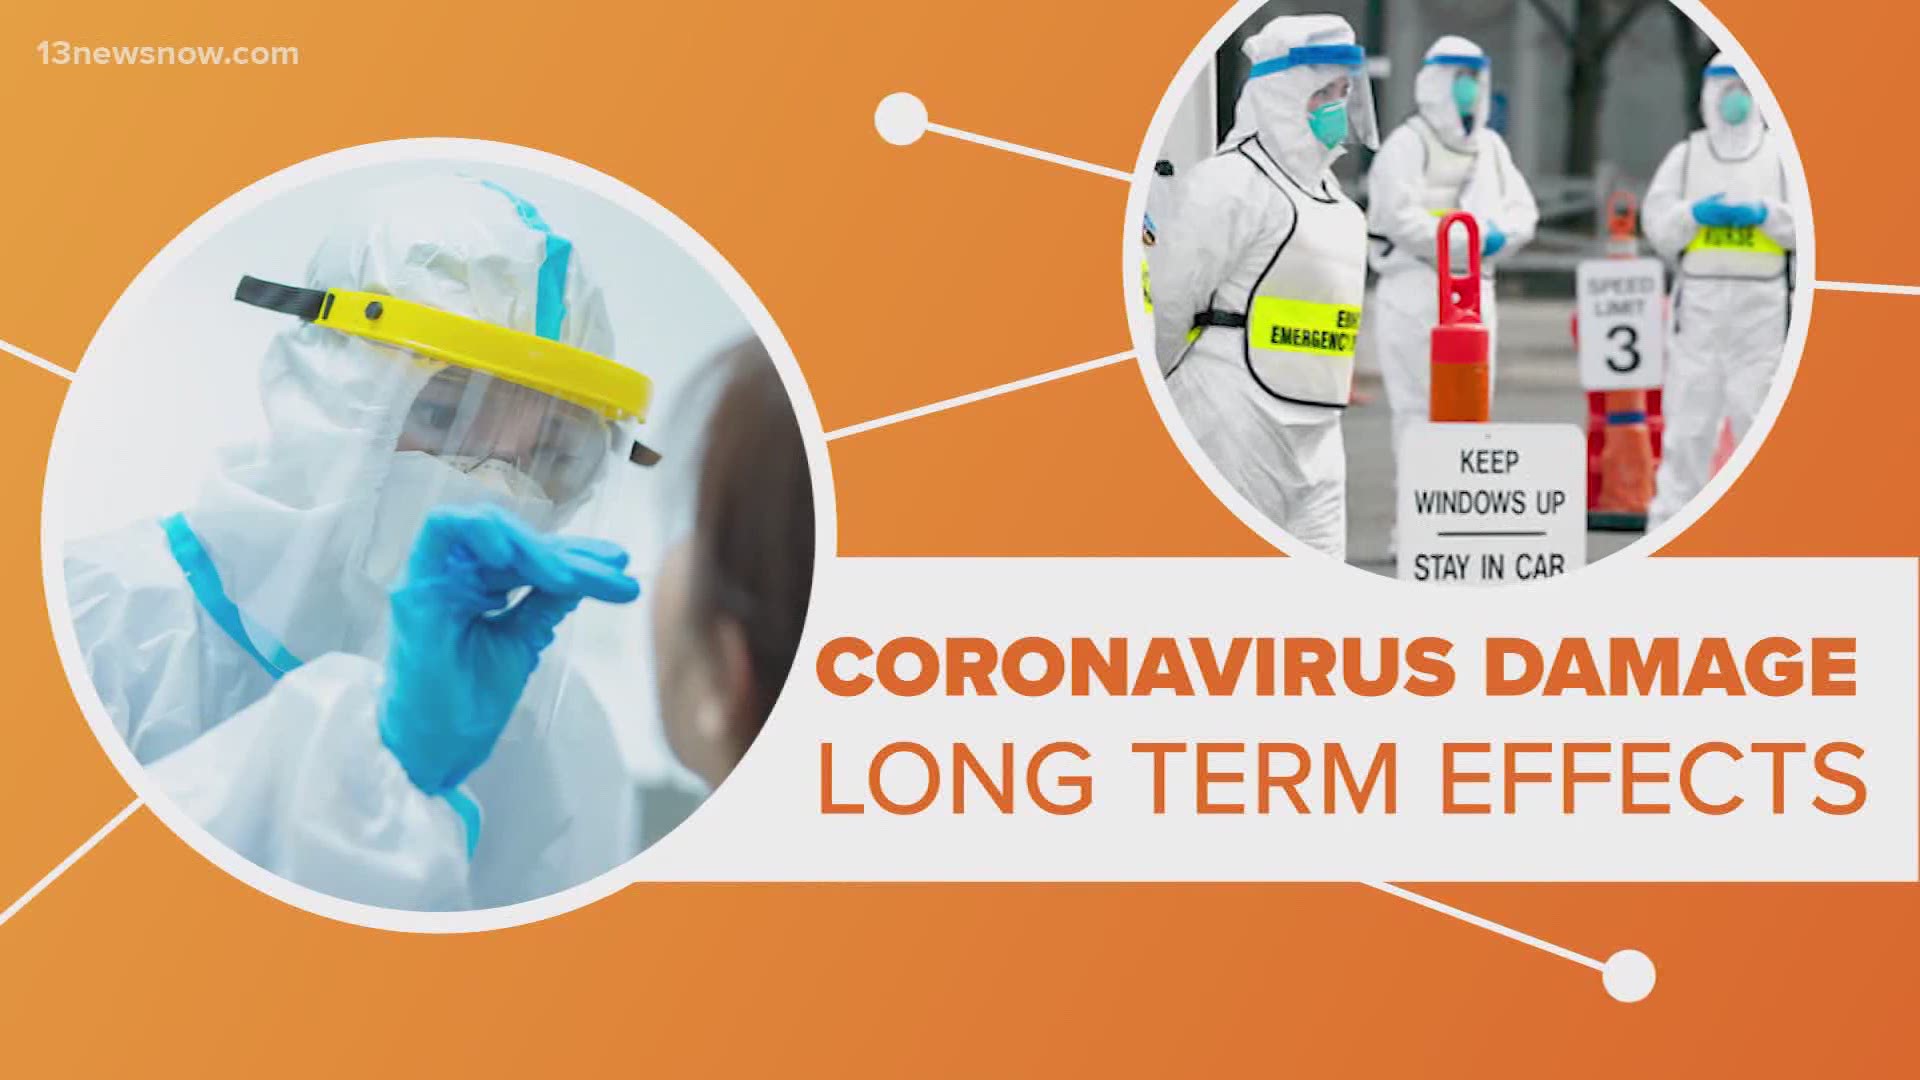 Connect The Dots: Longterm effects of coronavirus damage. Some include heart damage.